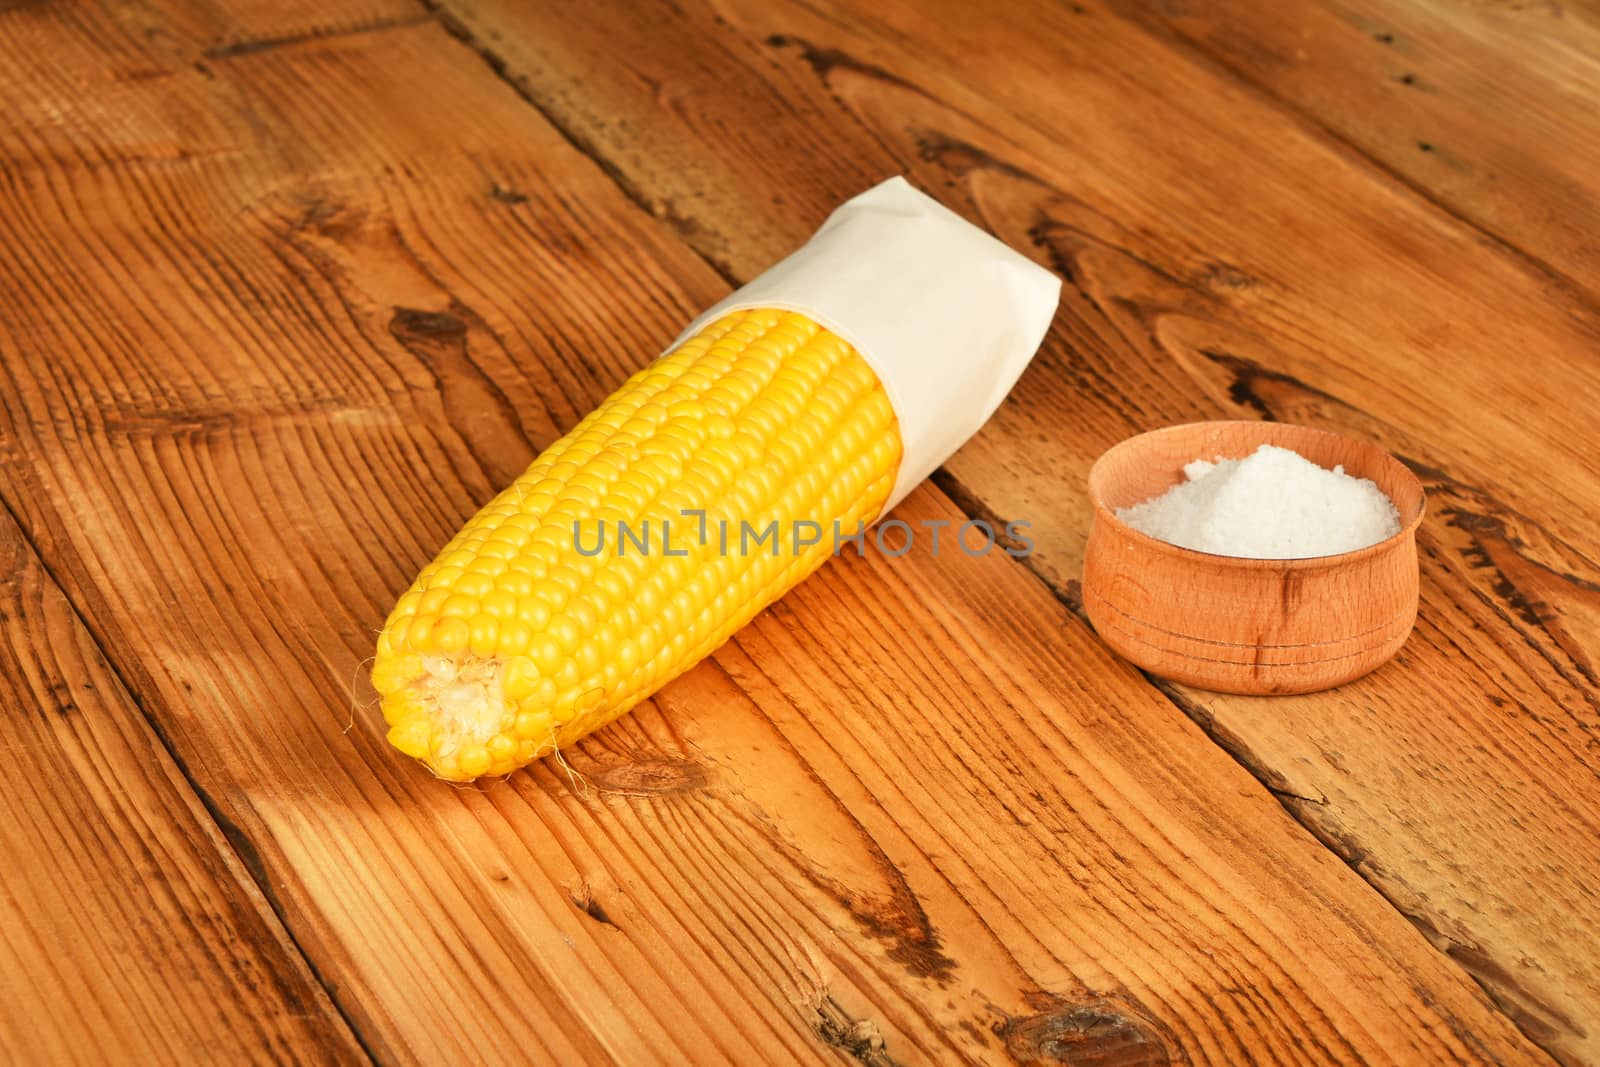 One open fresh yellow corn cob and salt in cup on brown vintage wooden surface